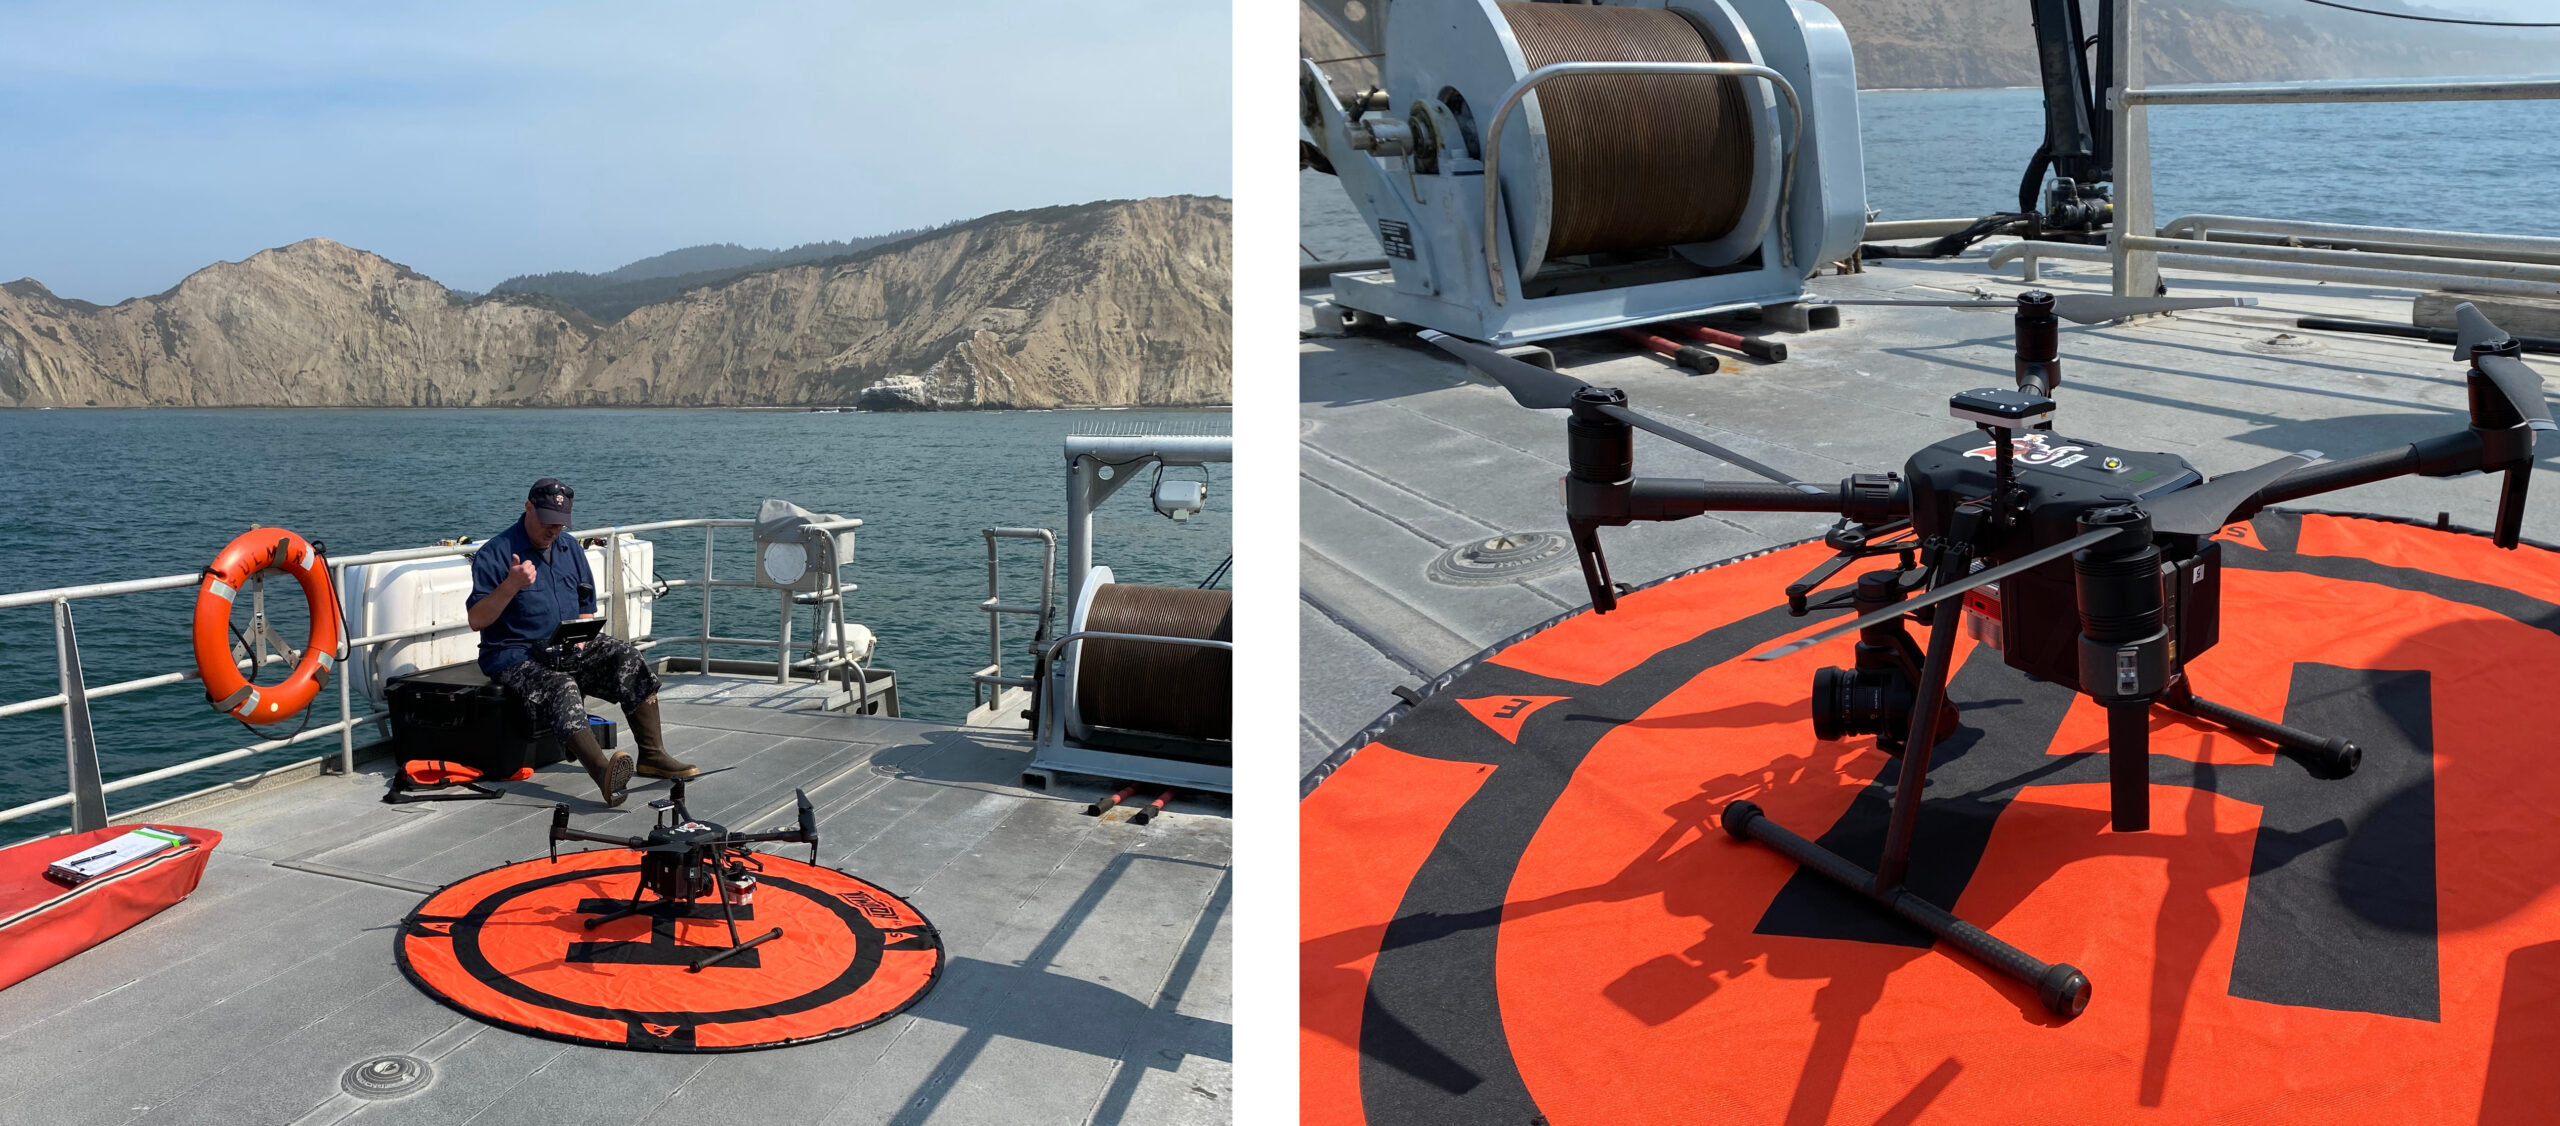 Pilot Pat Iampietro preparing for drone launch from the R/V Fulmar to map kelp canopy. Photos by Angela Zepp.